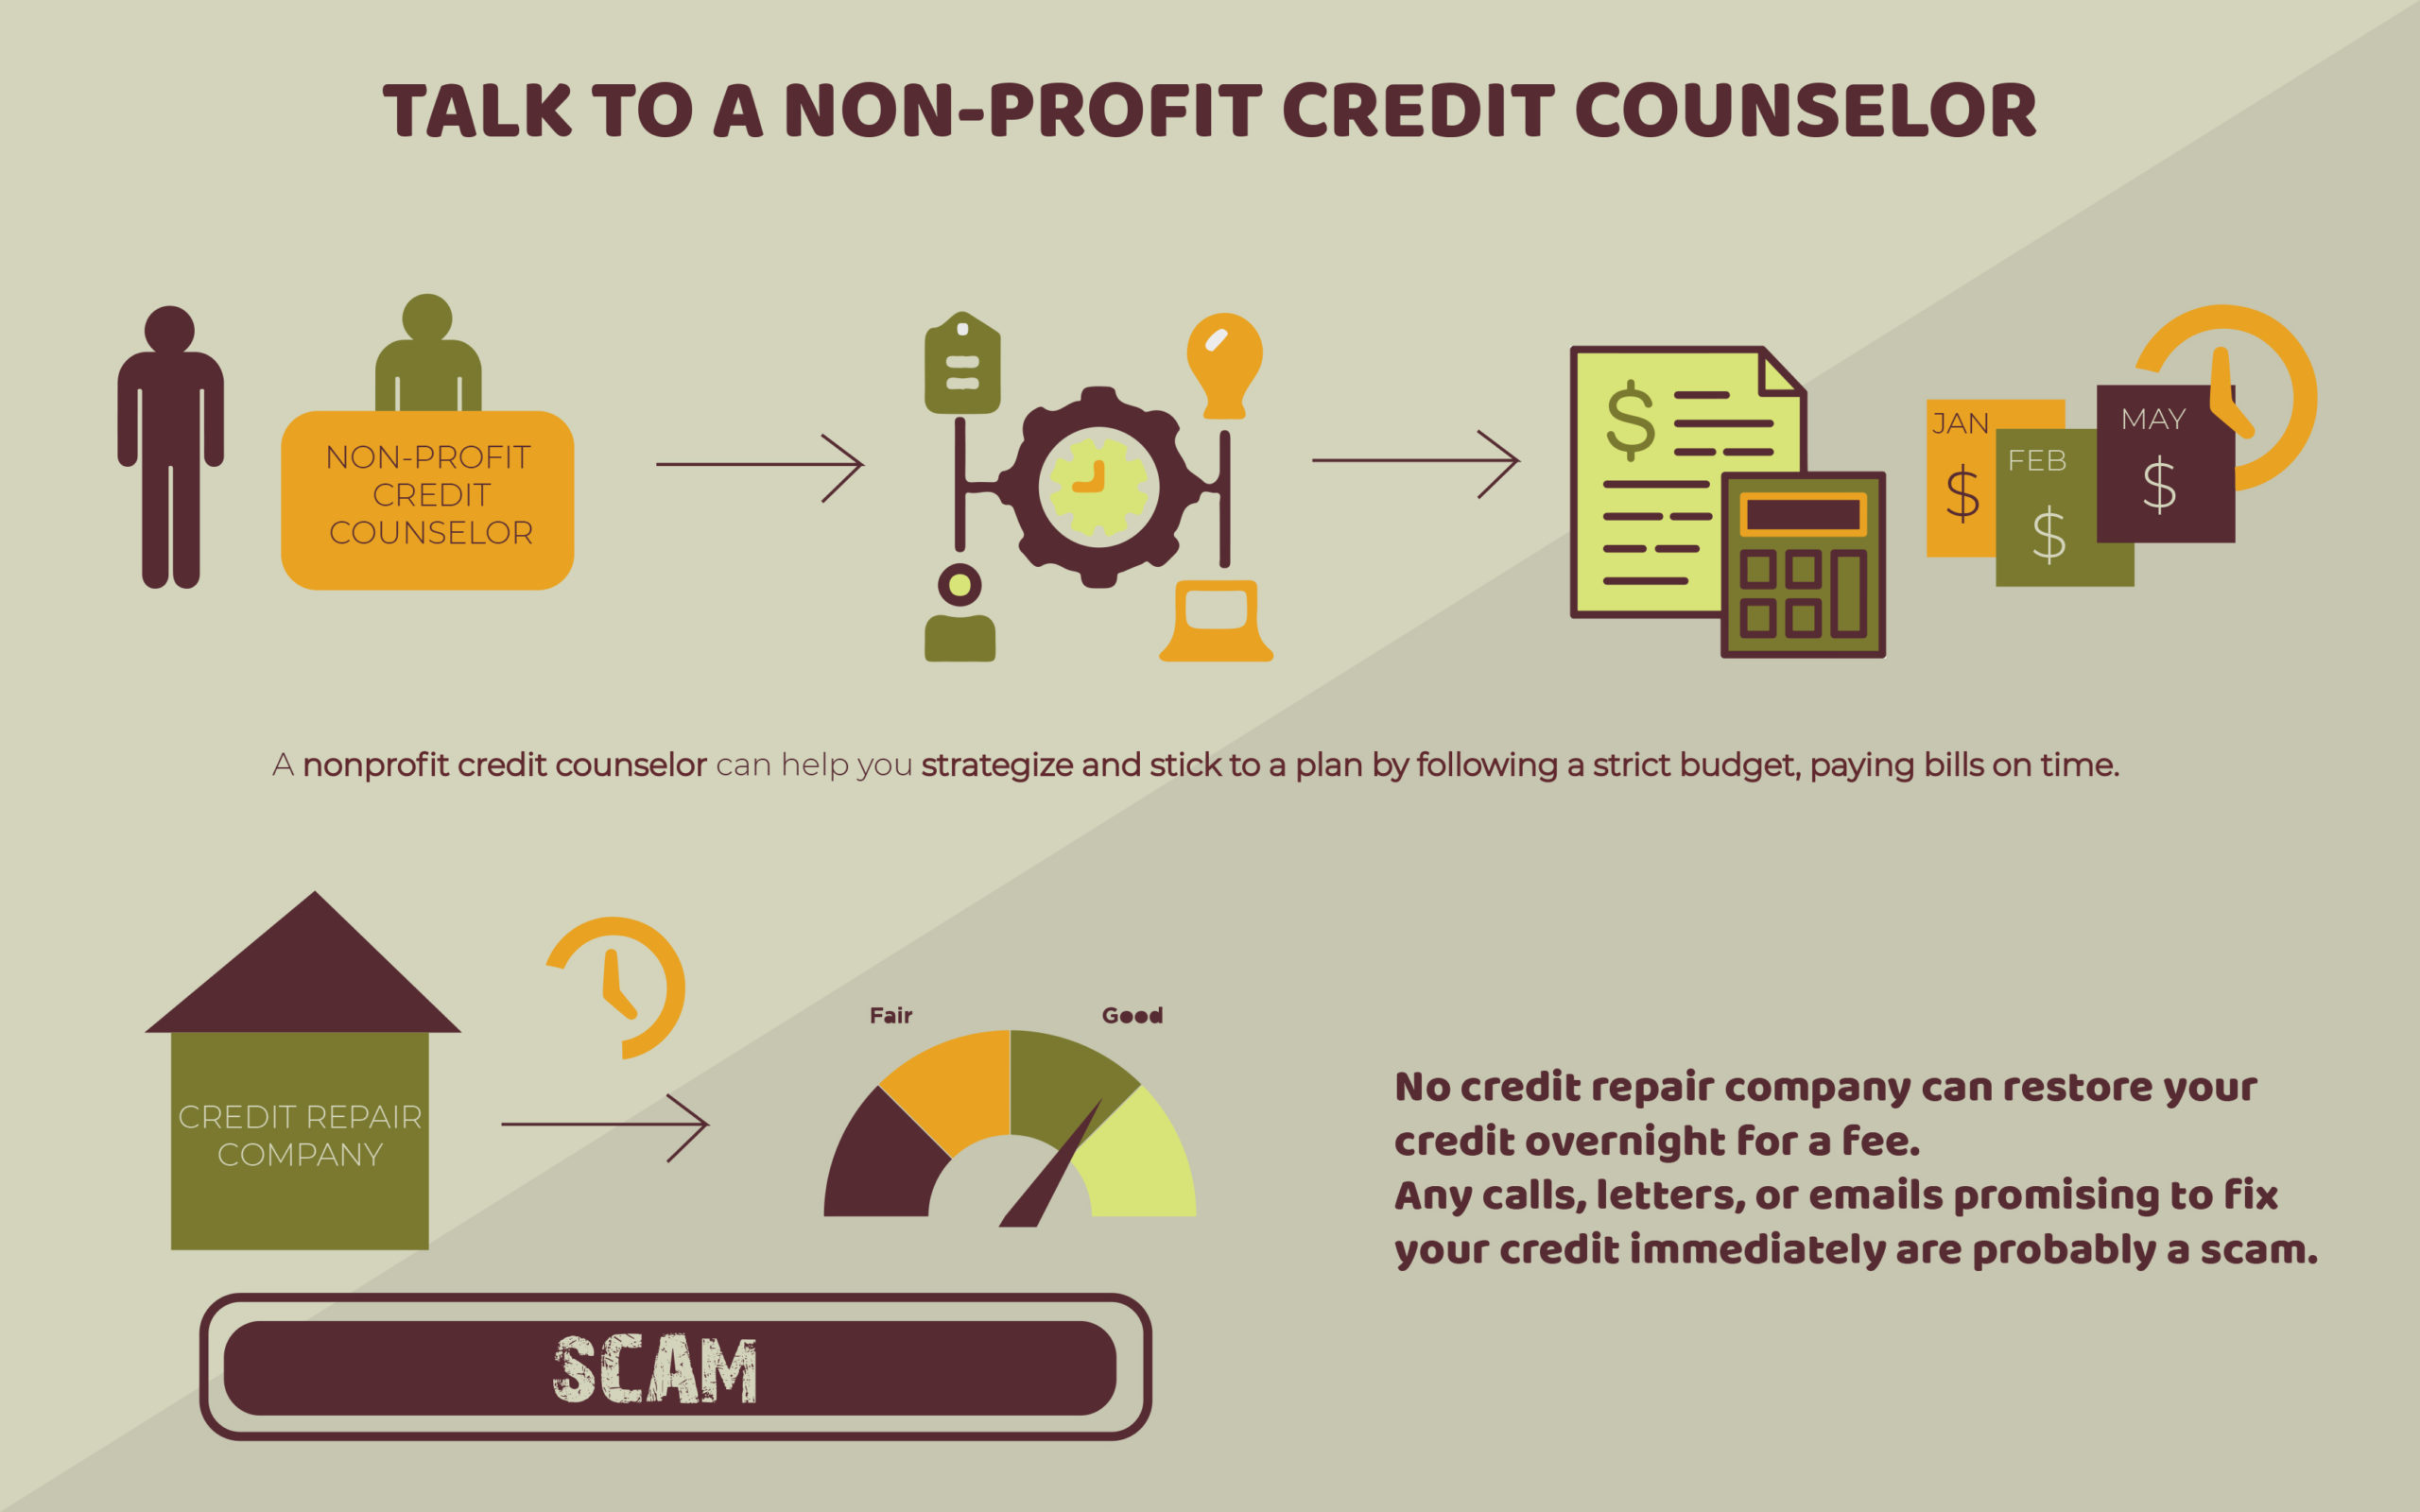 talk to a non-profit credit counselor